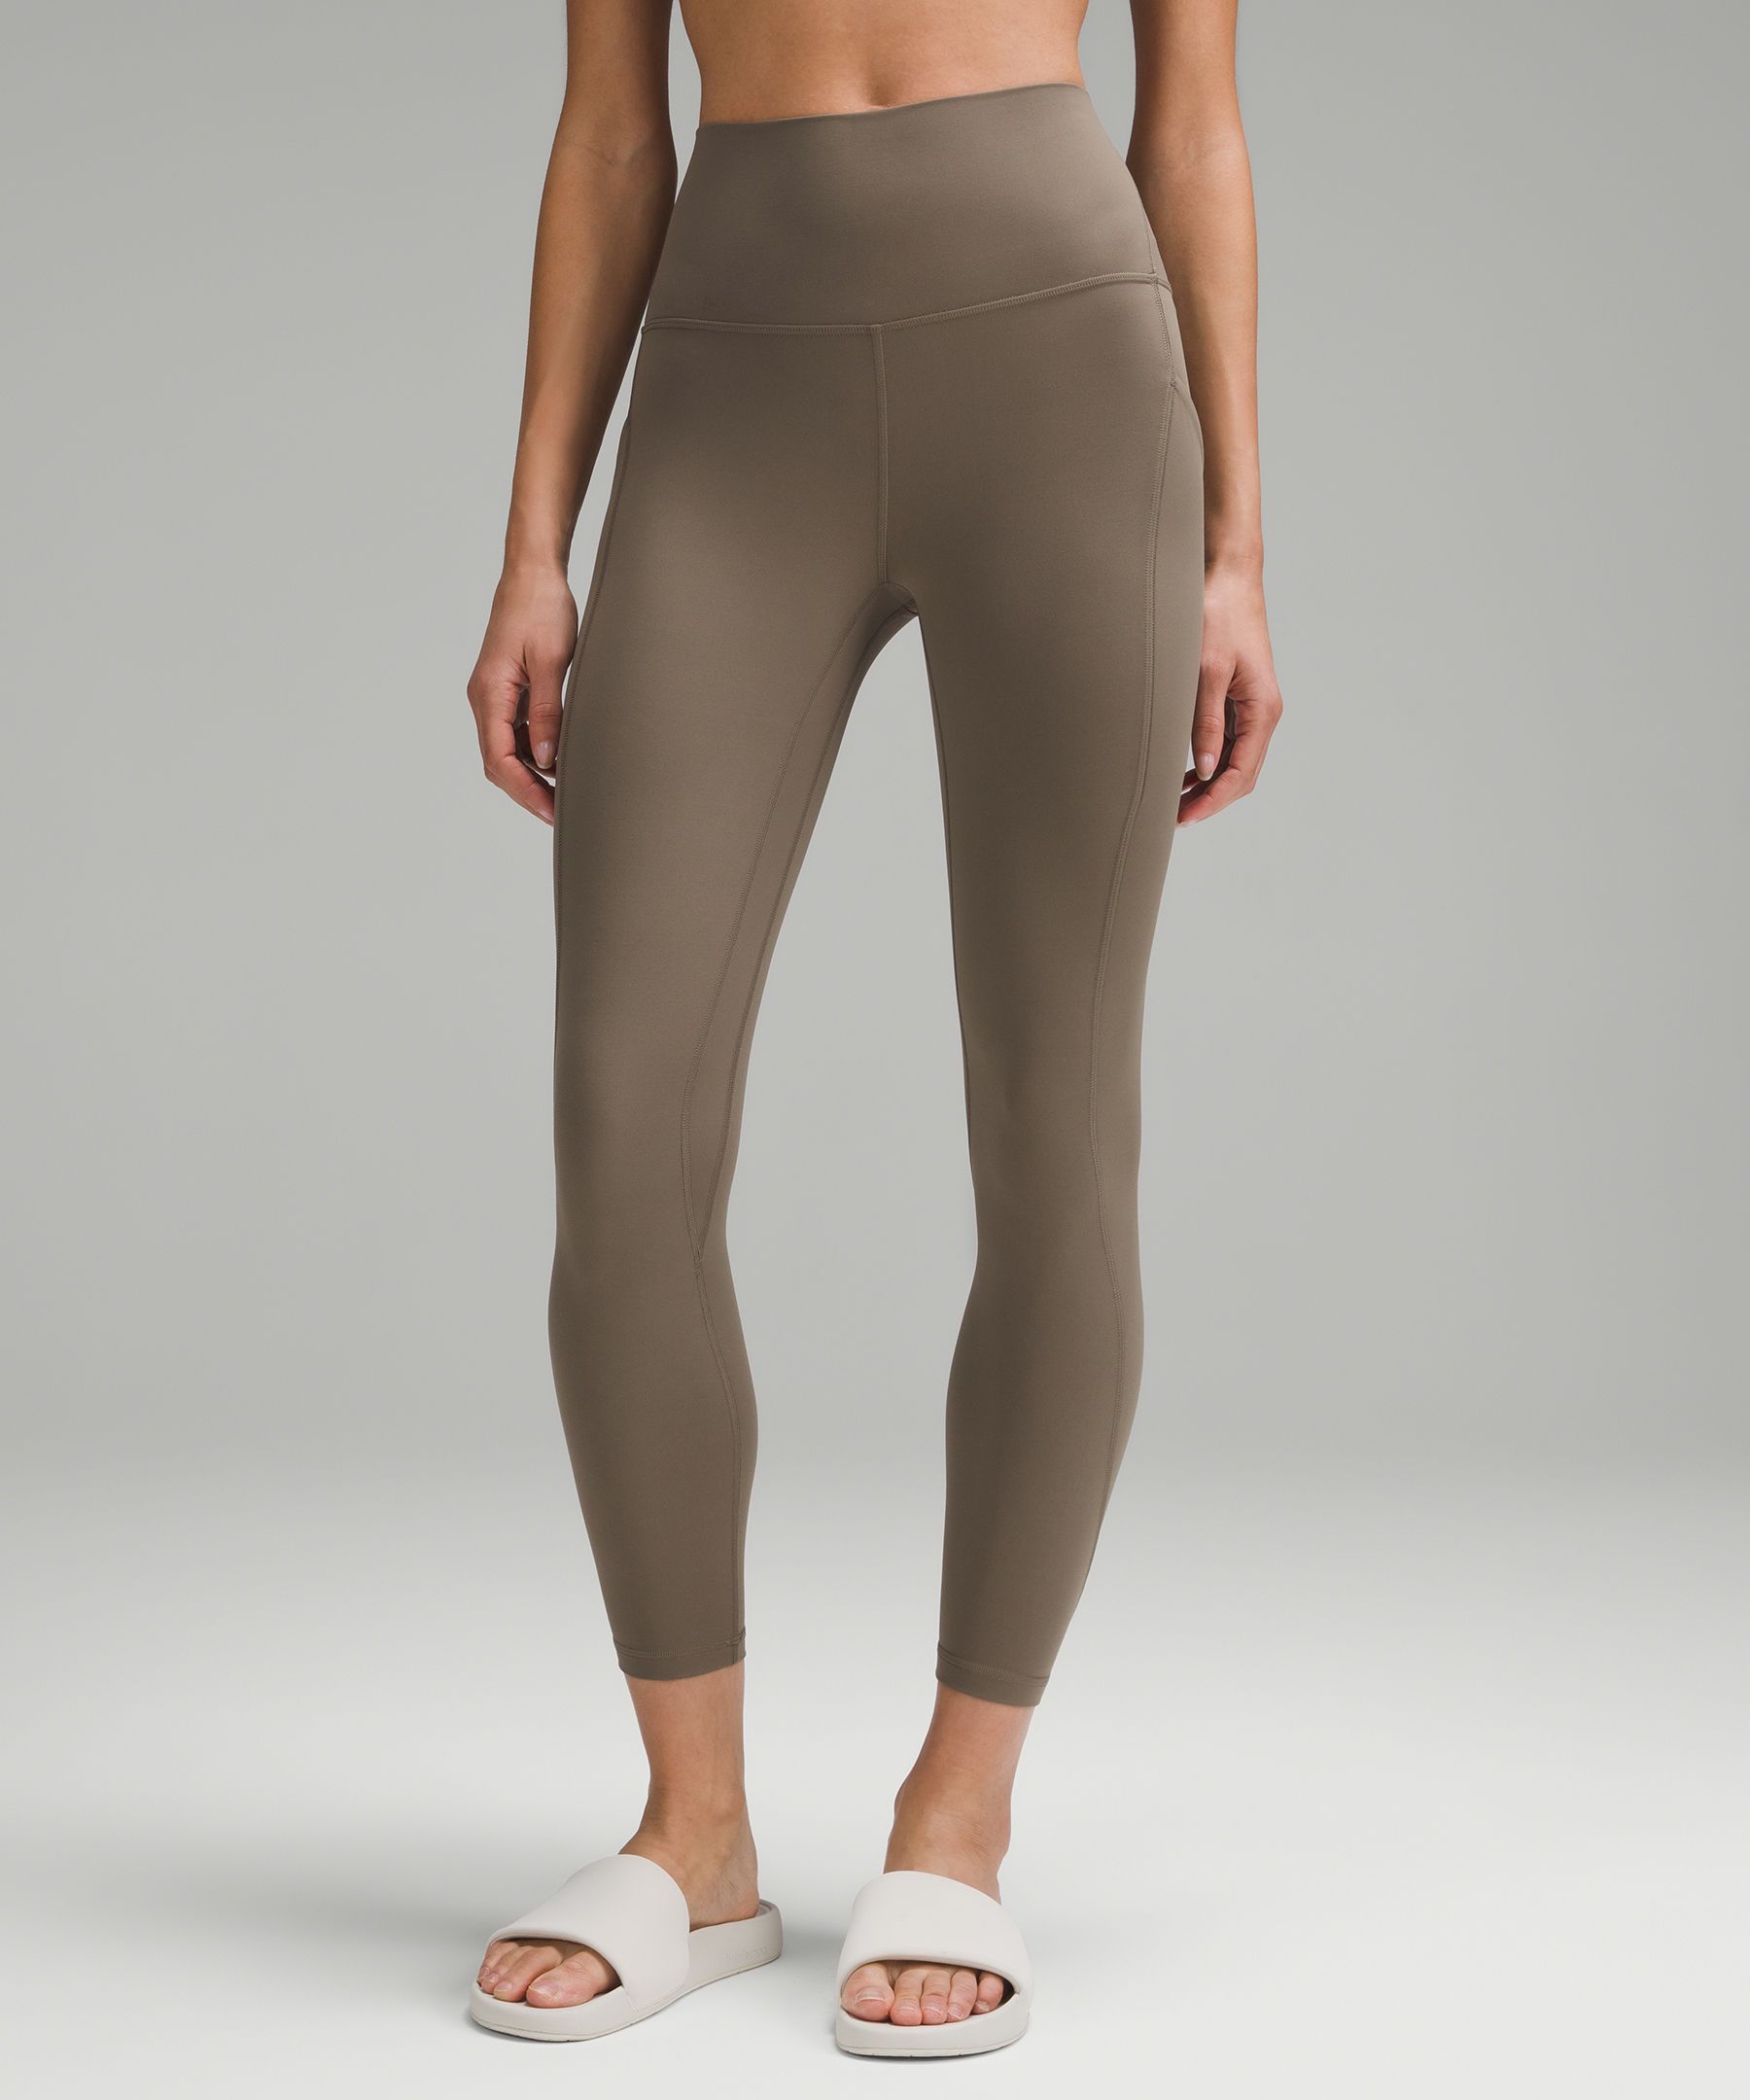 KEEP MOVING PANTS, sizing question — question in comment : r/lululemon